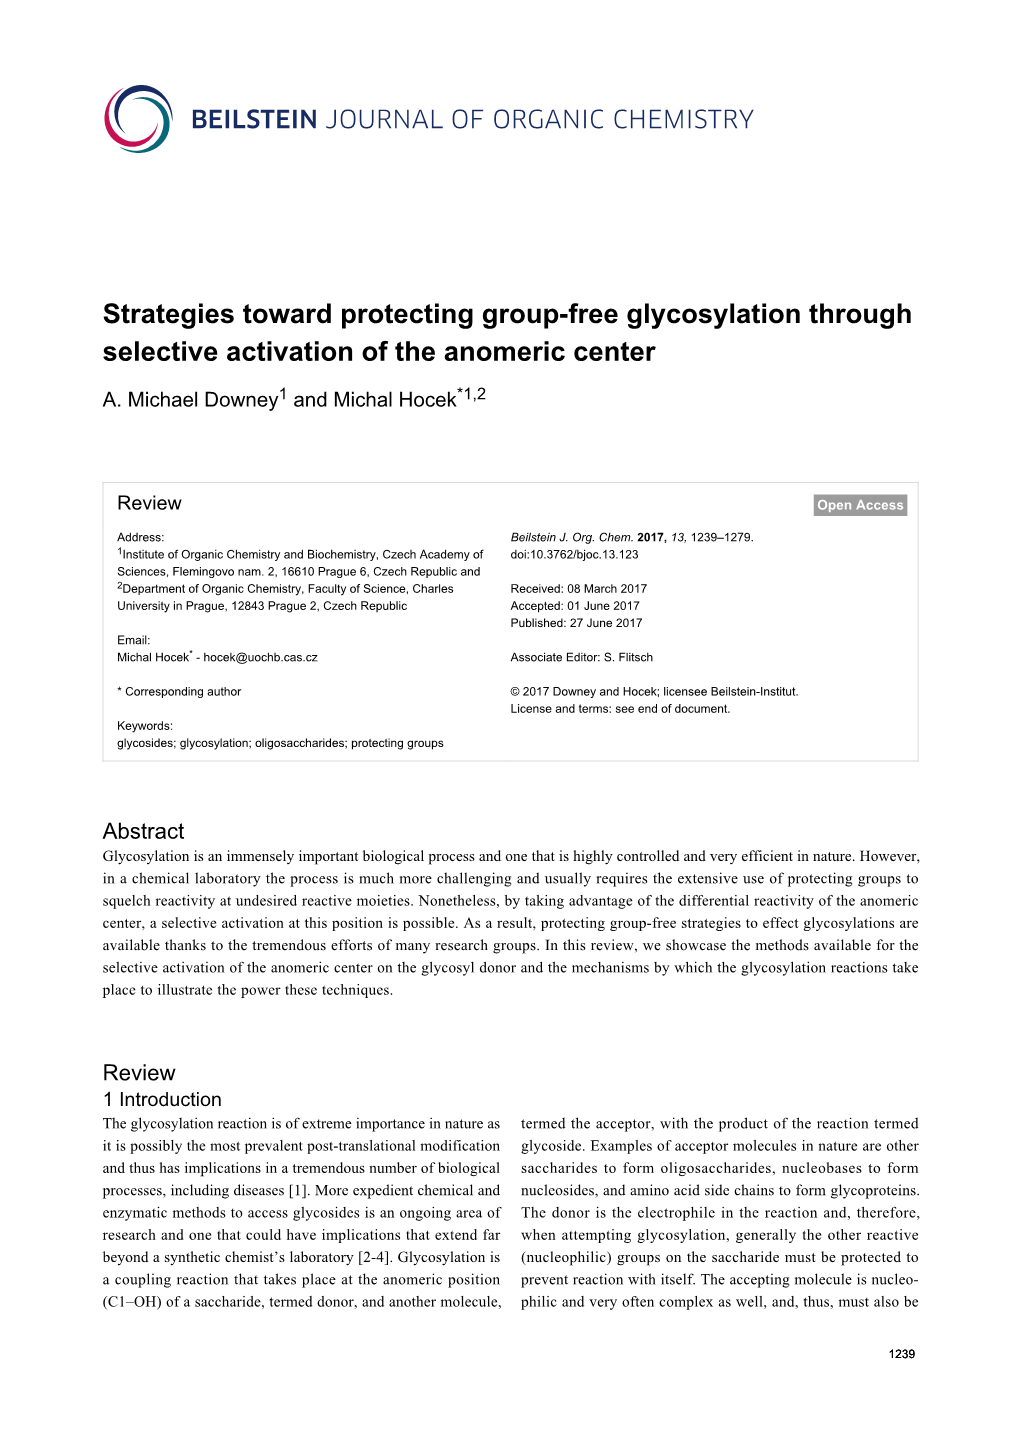 Strategies Toward Protecting Group-Free Glycosylation Through Selective Activation of the Anomeric Center